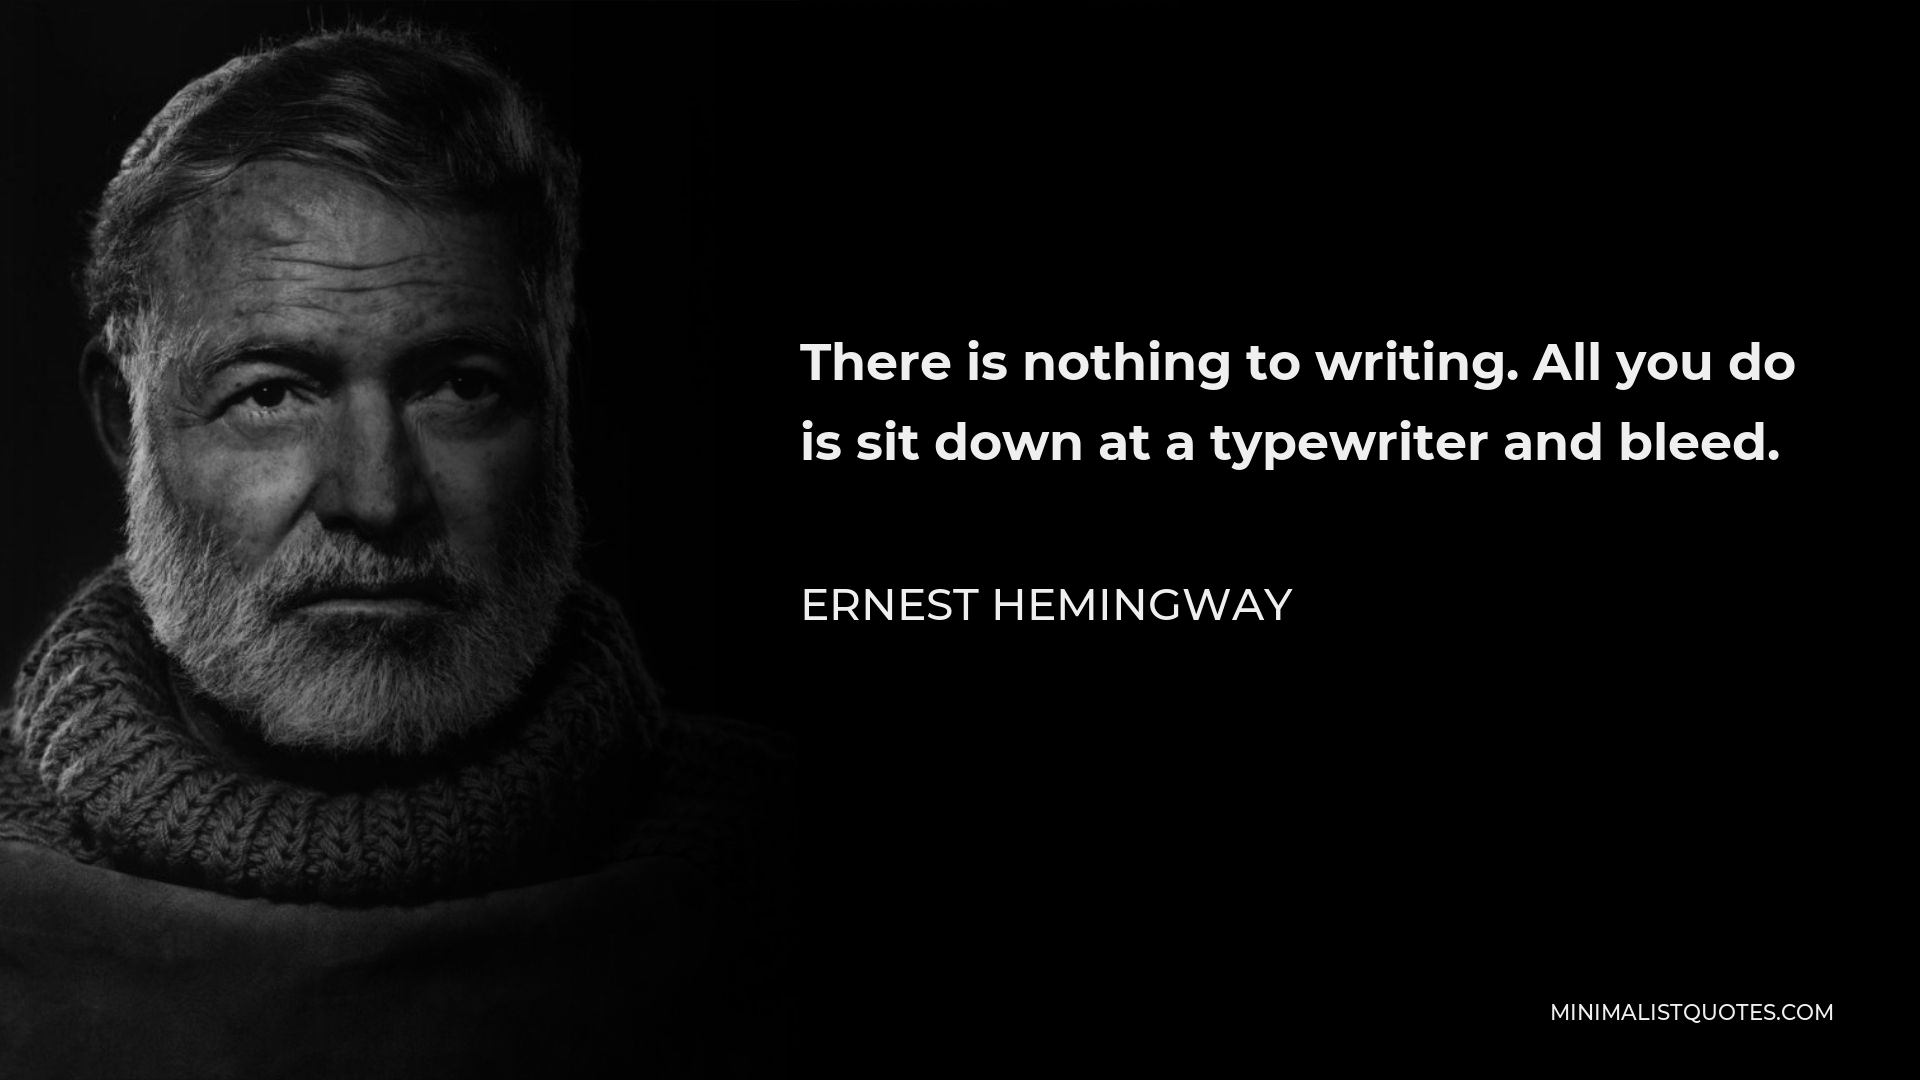 Ernest Hemingway Quote - There is nothing to writing. All you do is sit down at a typewriter and bleed.